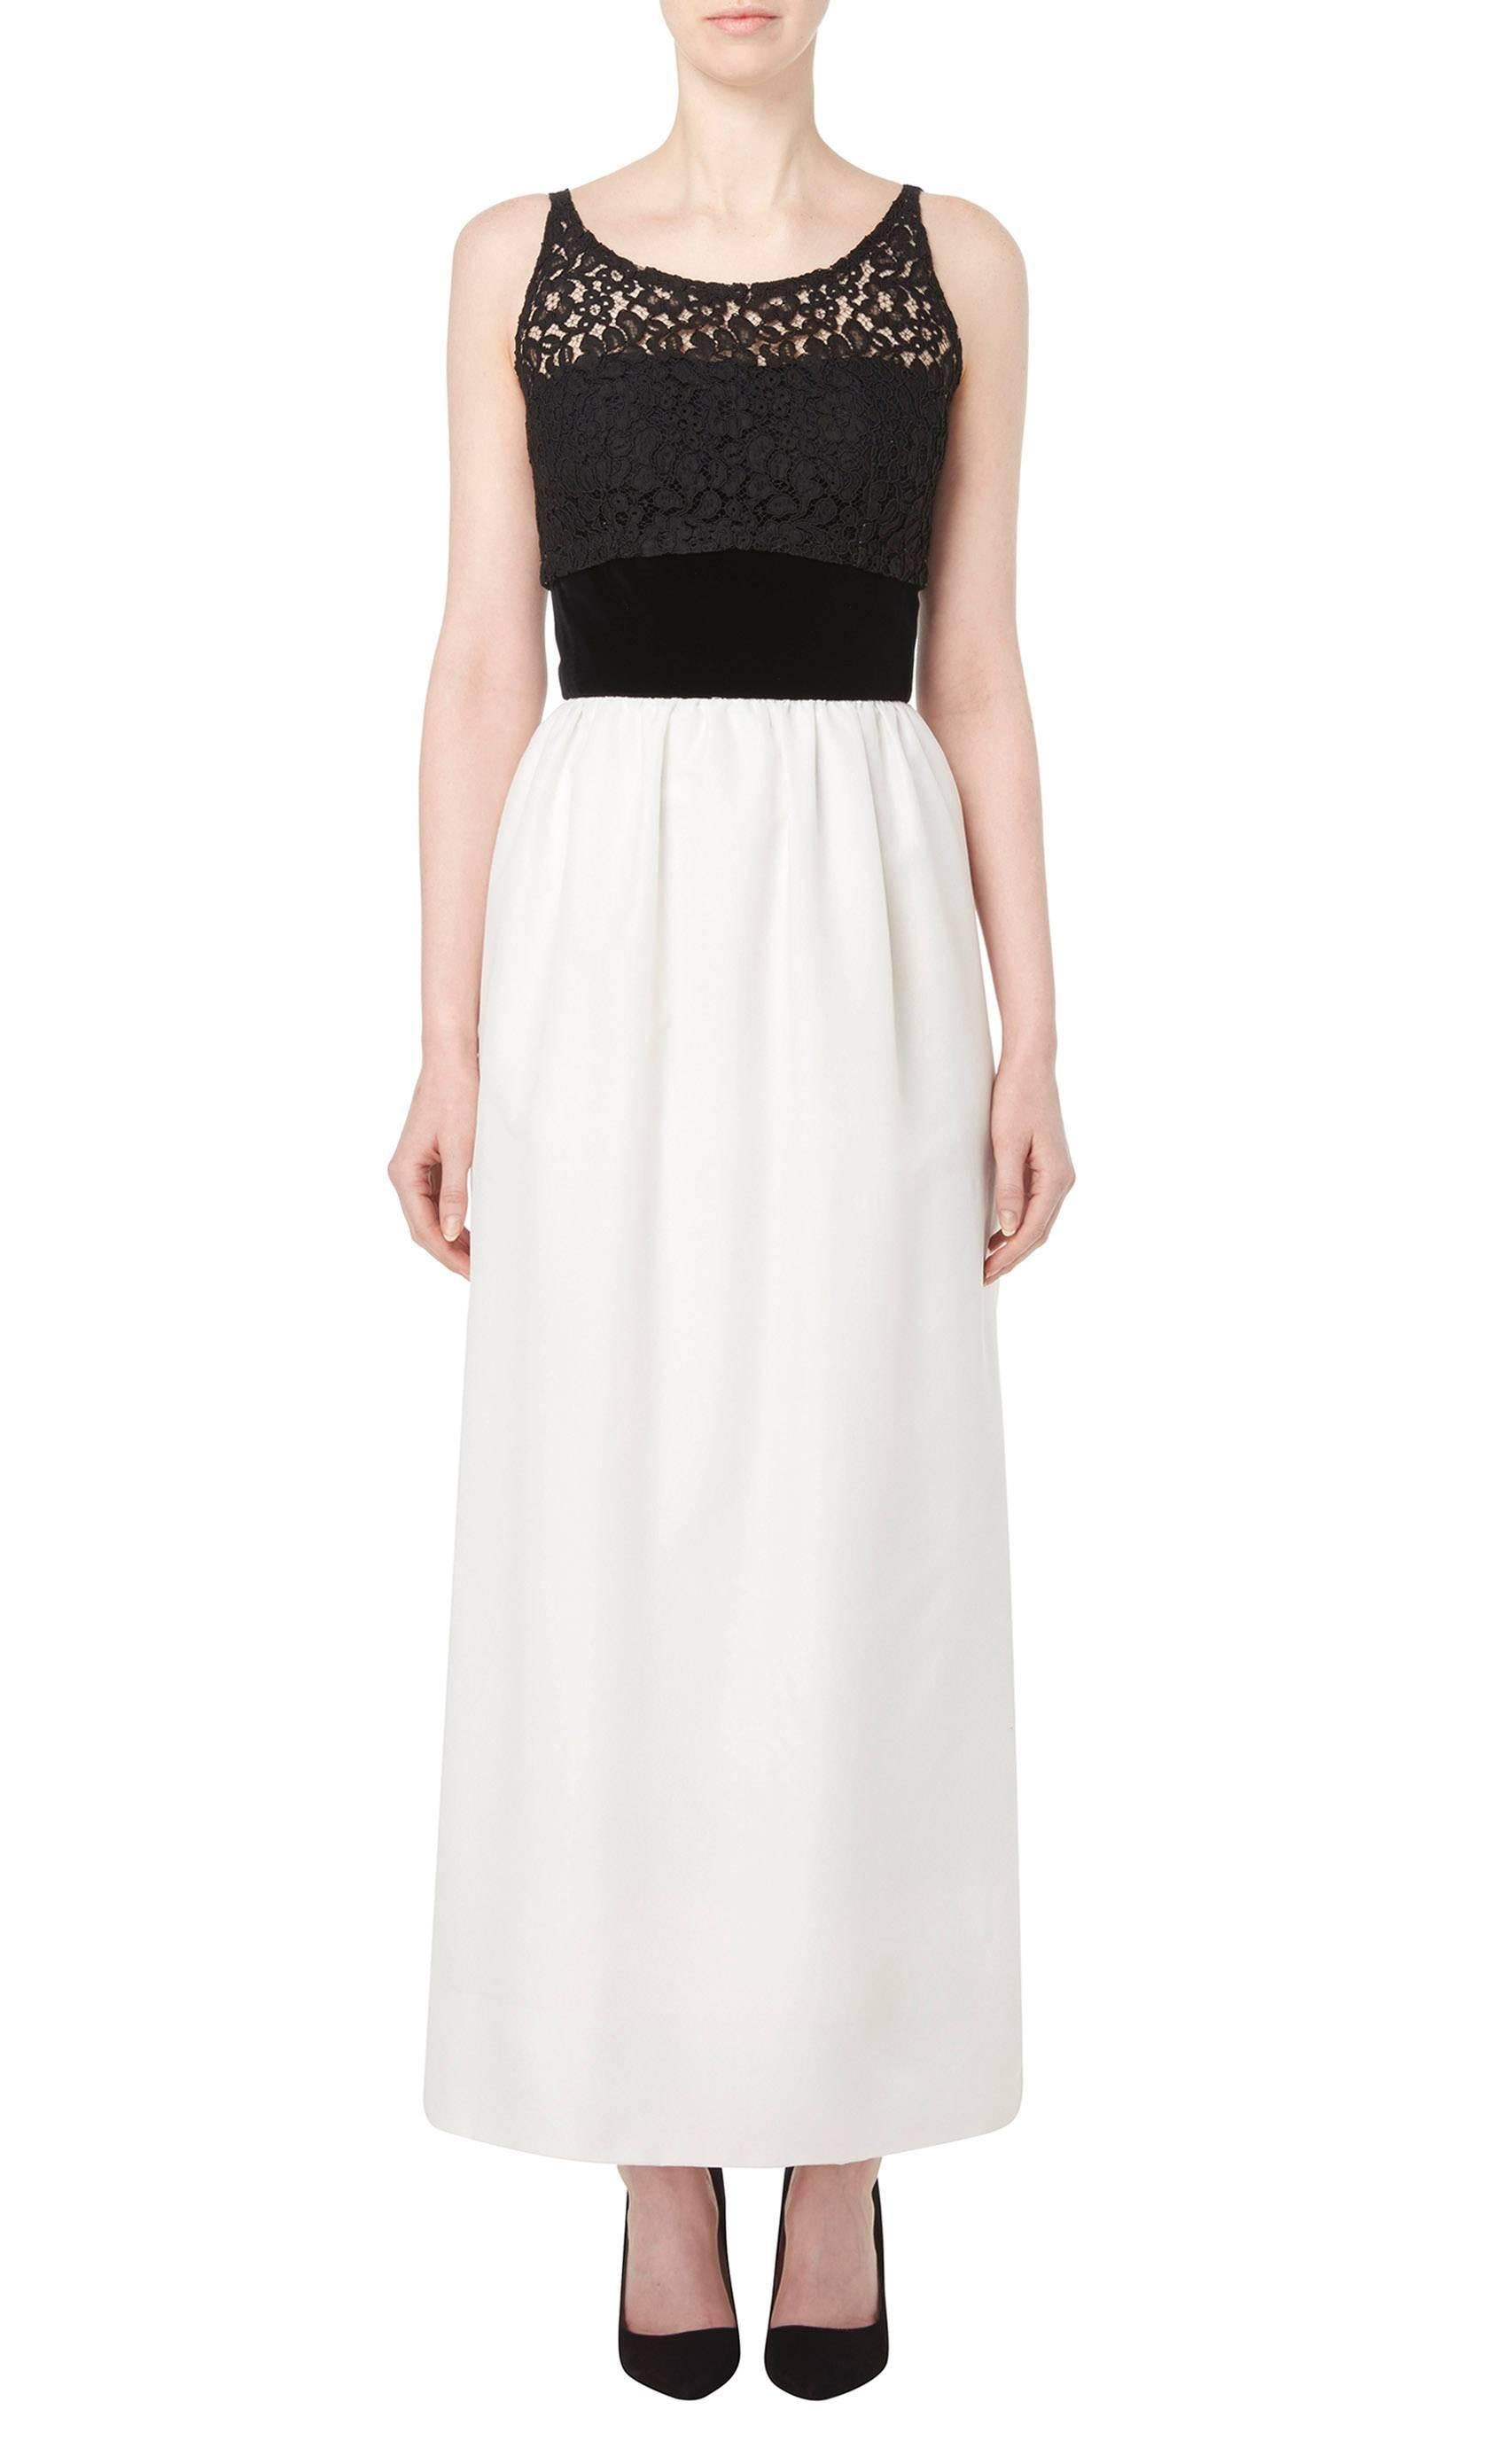 This stunning monochrome evening dress by Jacques Heim is made up of a black lace top, black velvet waistband and ivory silk skirt. The dress features a flattering scooped neckline, plunging lower at the back, with a split between the lace and